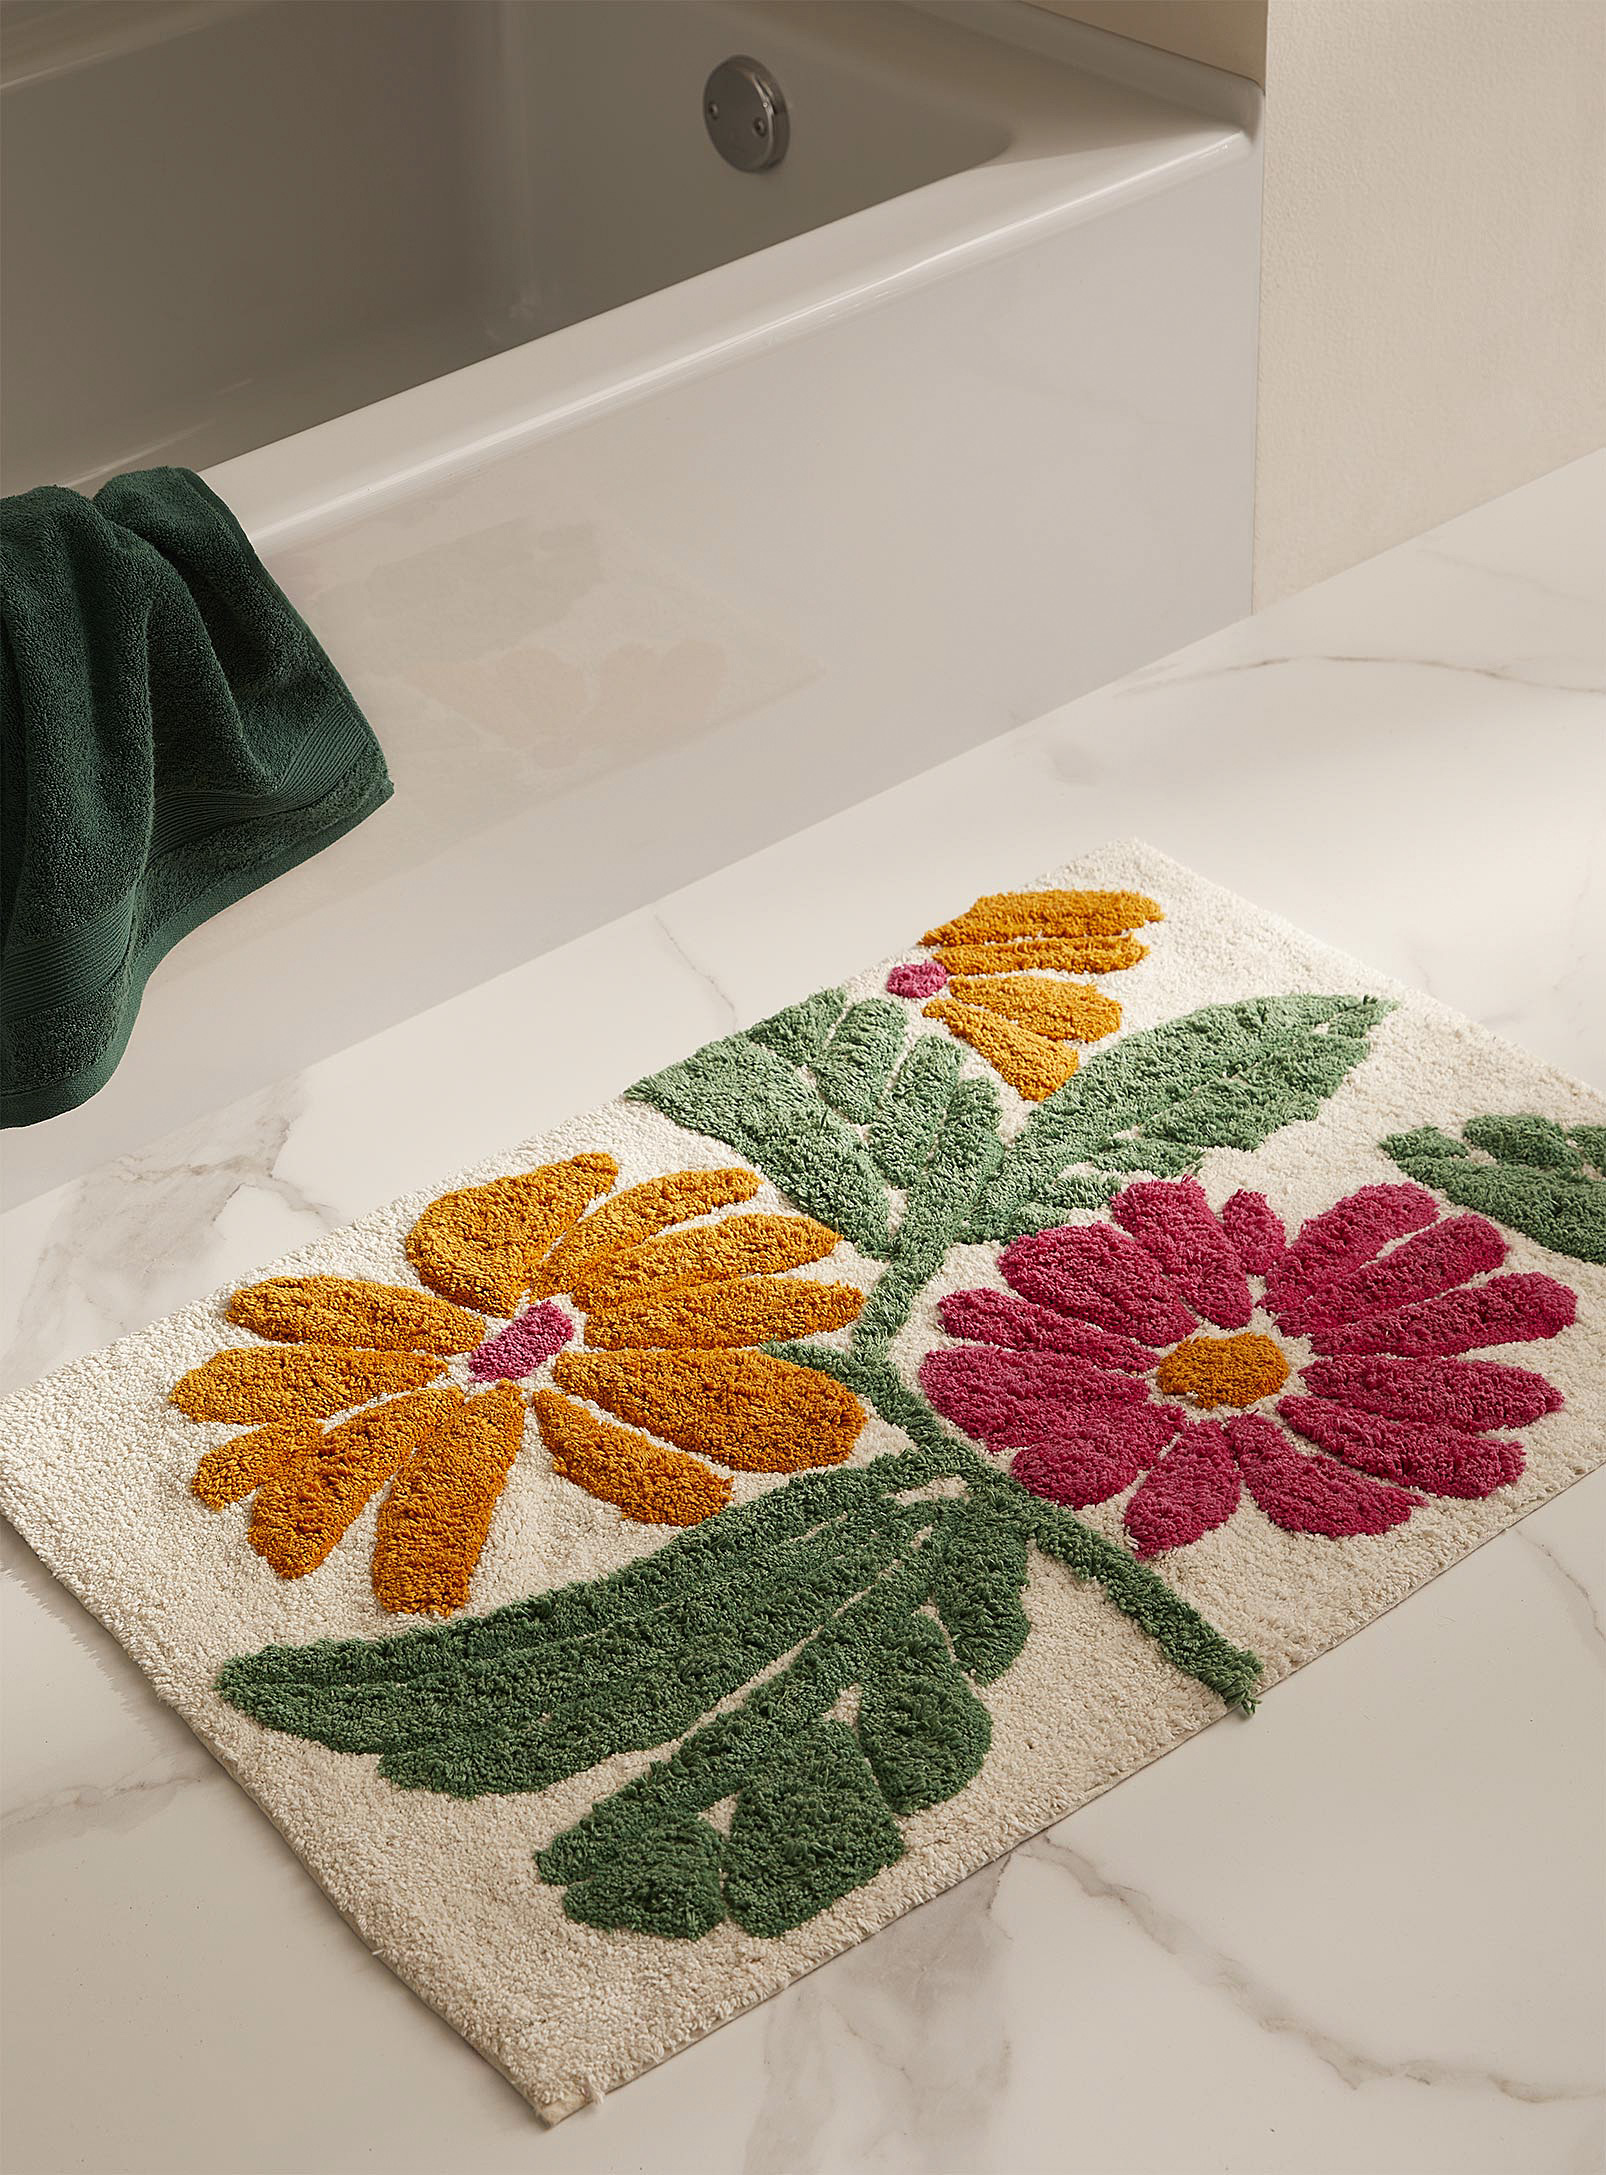 Simons Maison Spring Flowers Recycled Cotton Bath Mat 50 X 80 Cm In Patterned White